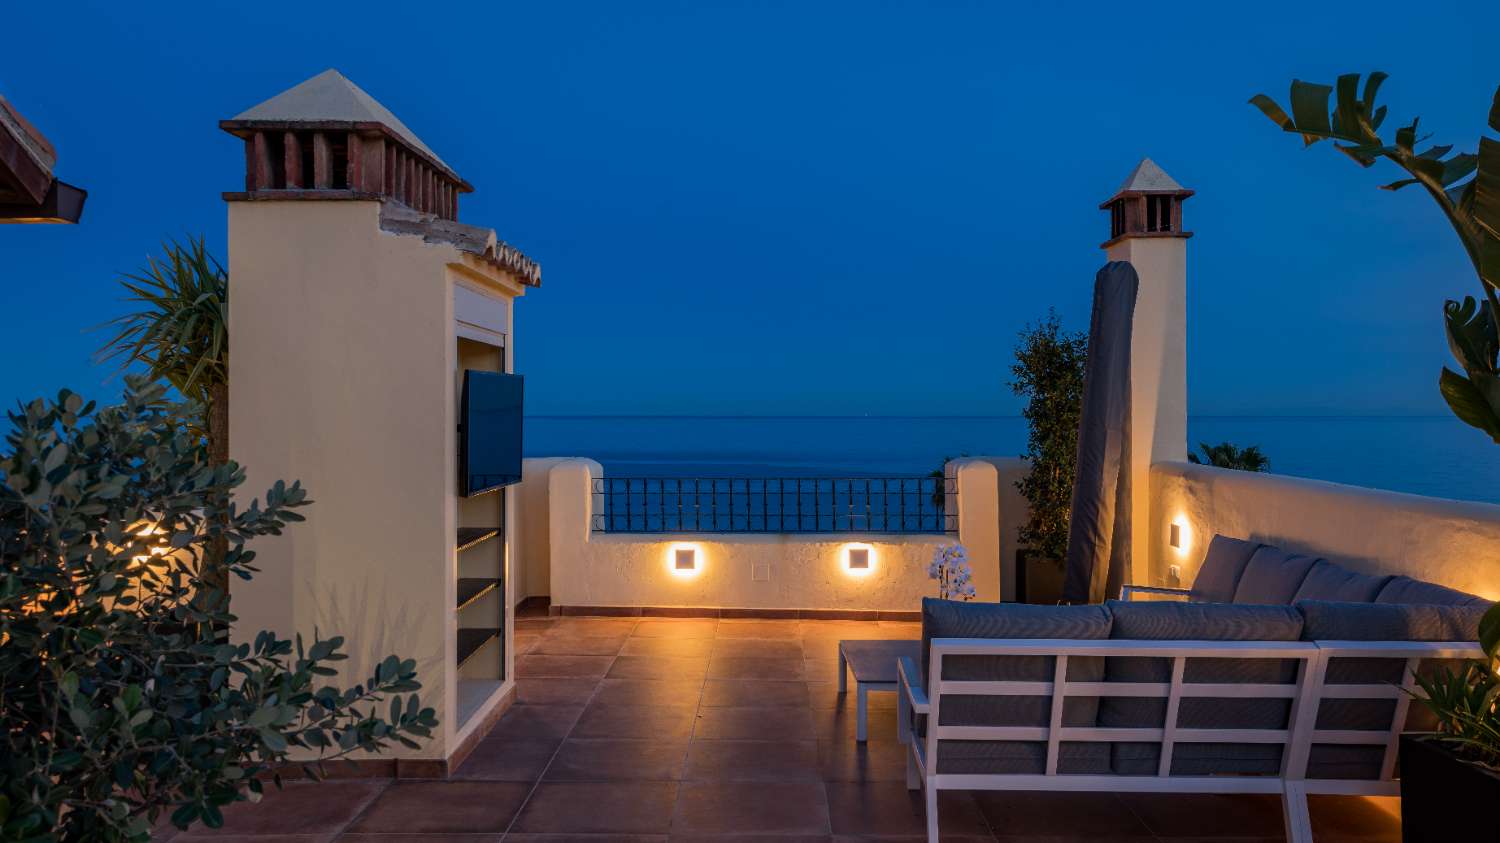 SOLD! SPECTACULAR DUPLEX PENTHOUSE WITH PANORAMIC SEA VIEWS